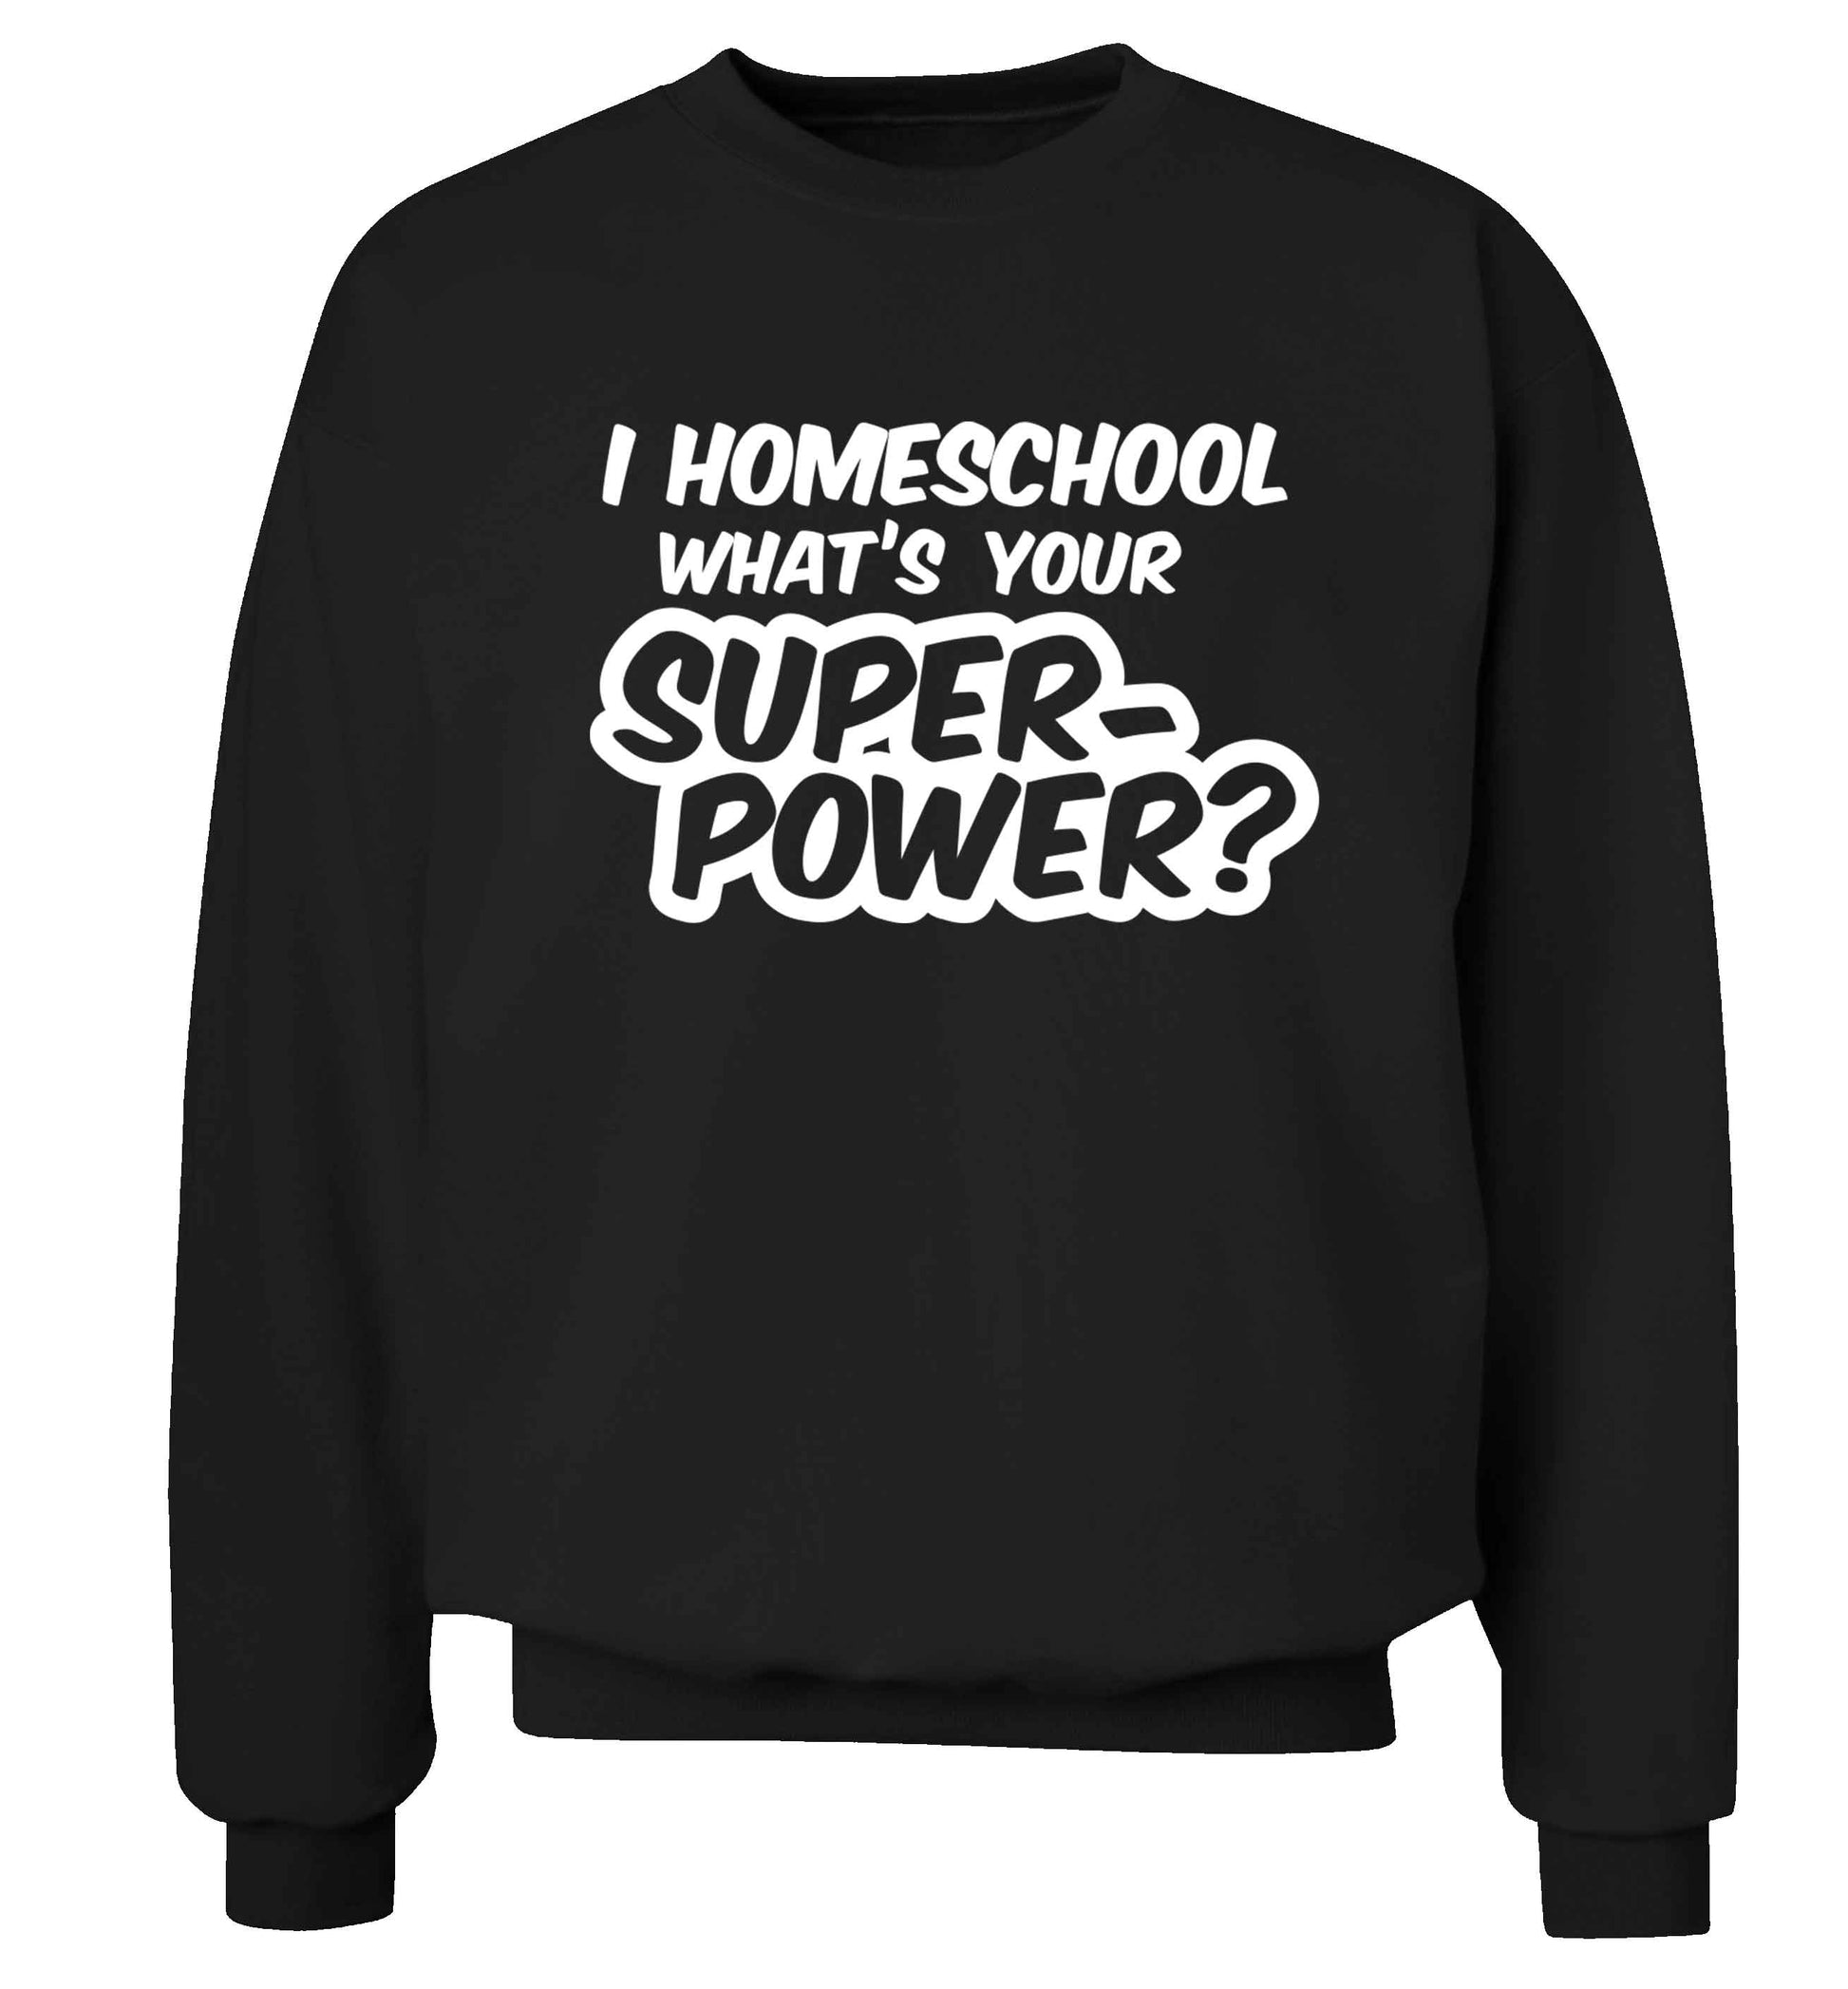 I homeschool what's your superpower? Adult's unisex black Sweater 2XL